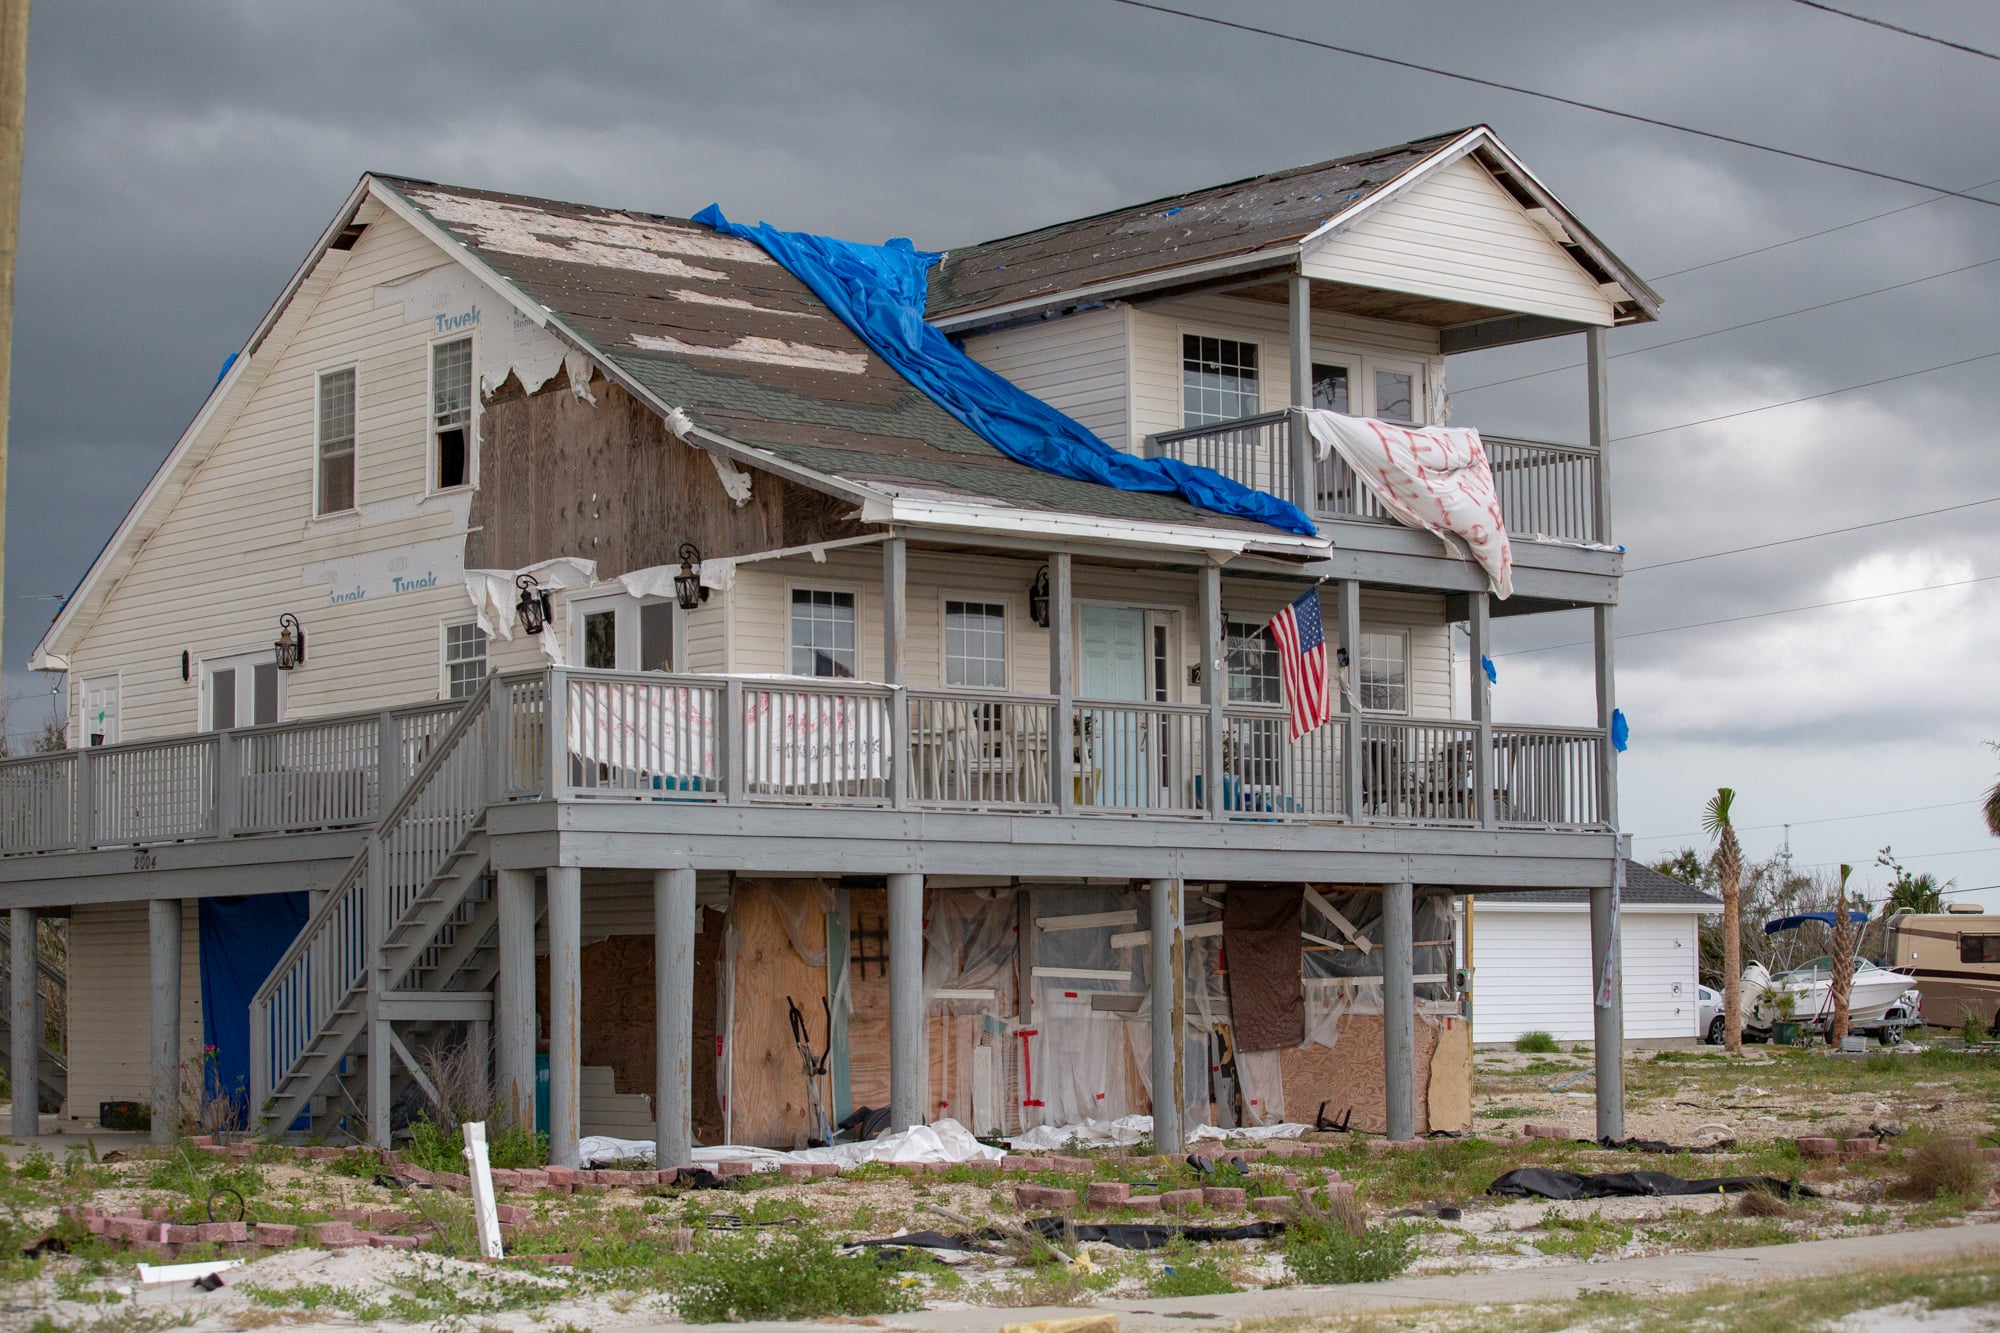 The eye of Hurricane Michael hit Mexico Beach, Florida, where damages have yet to be repaired. (Peter Nicieja/News21).